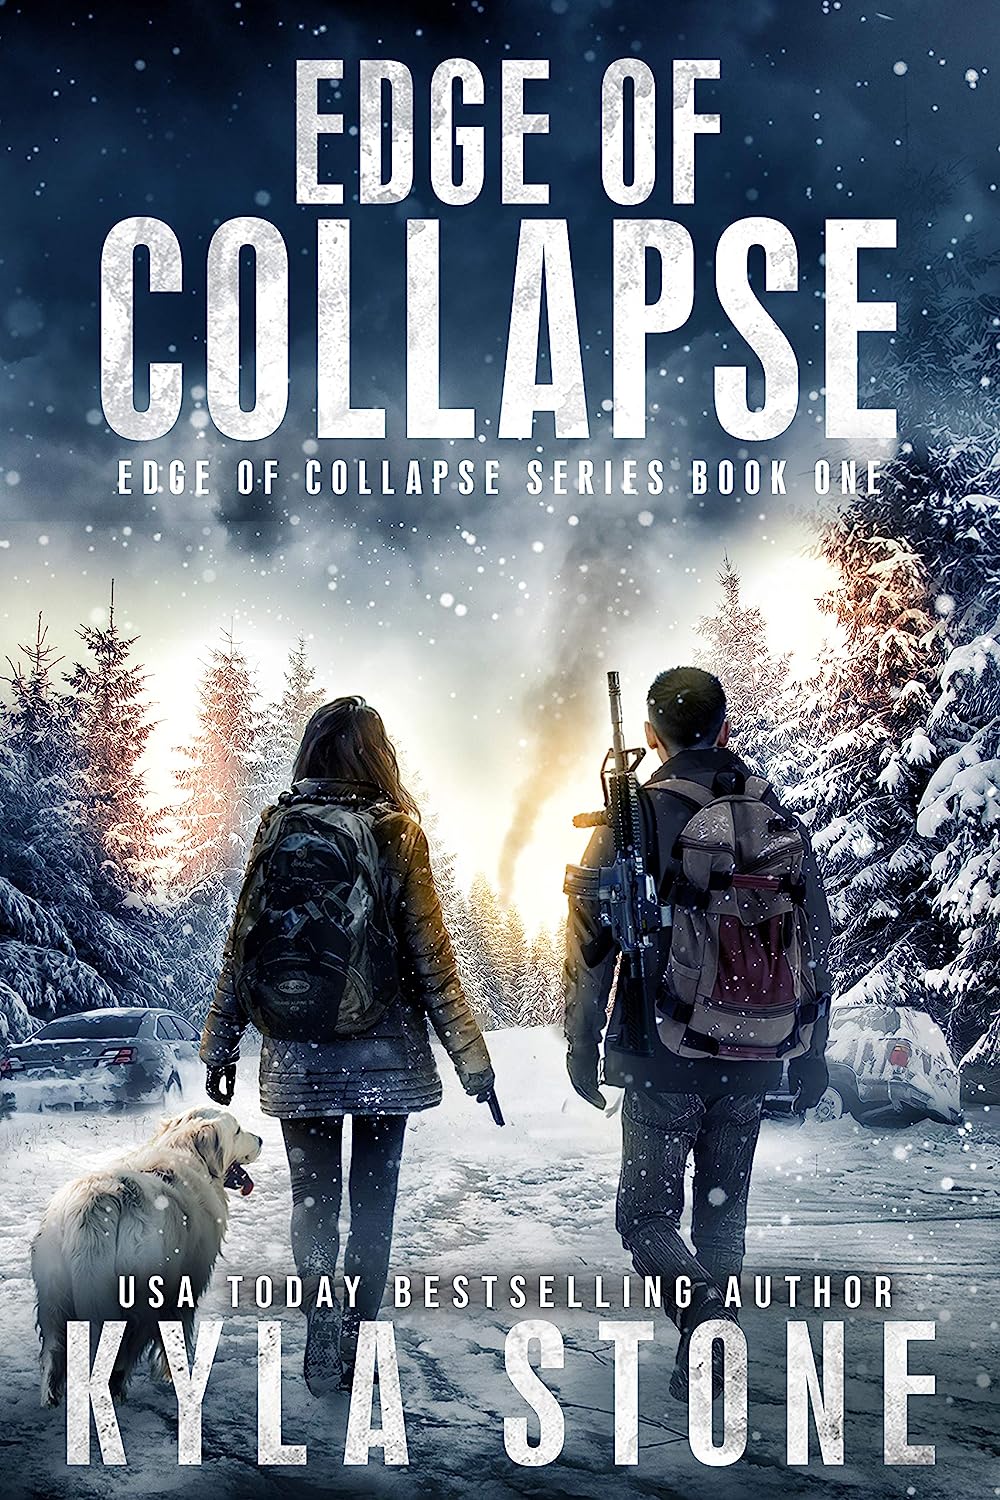 Edge of Collapse: A Post-Apocalyptic Survival Thriller Book 1 of 7